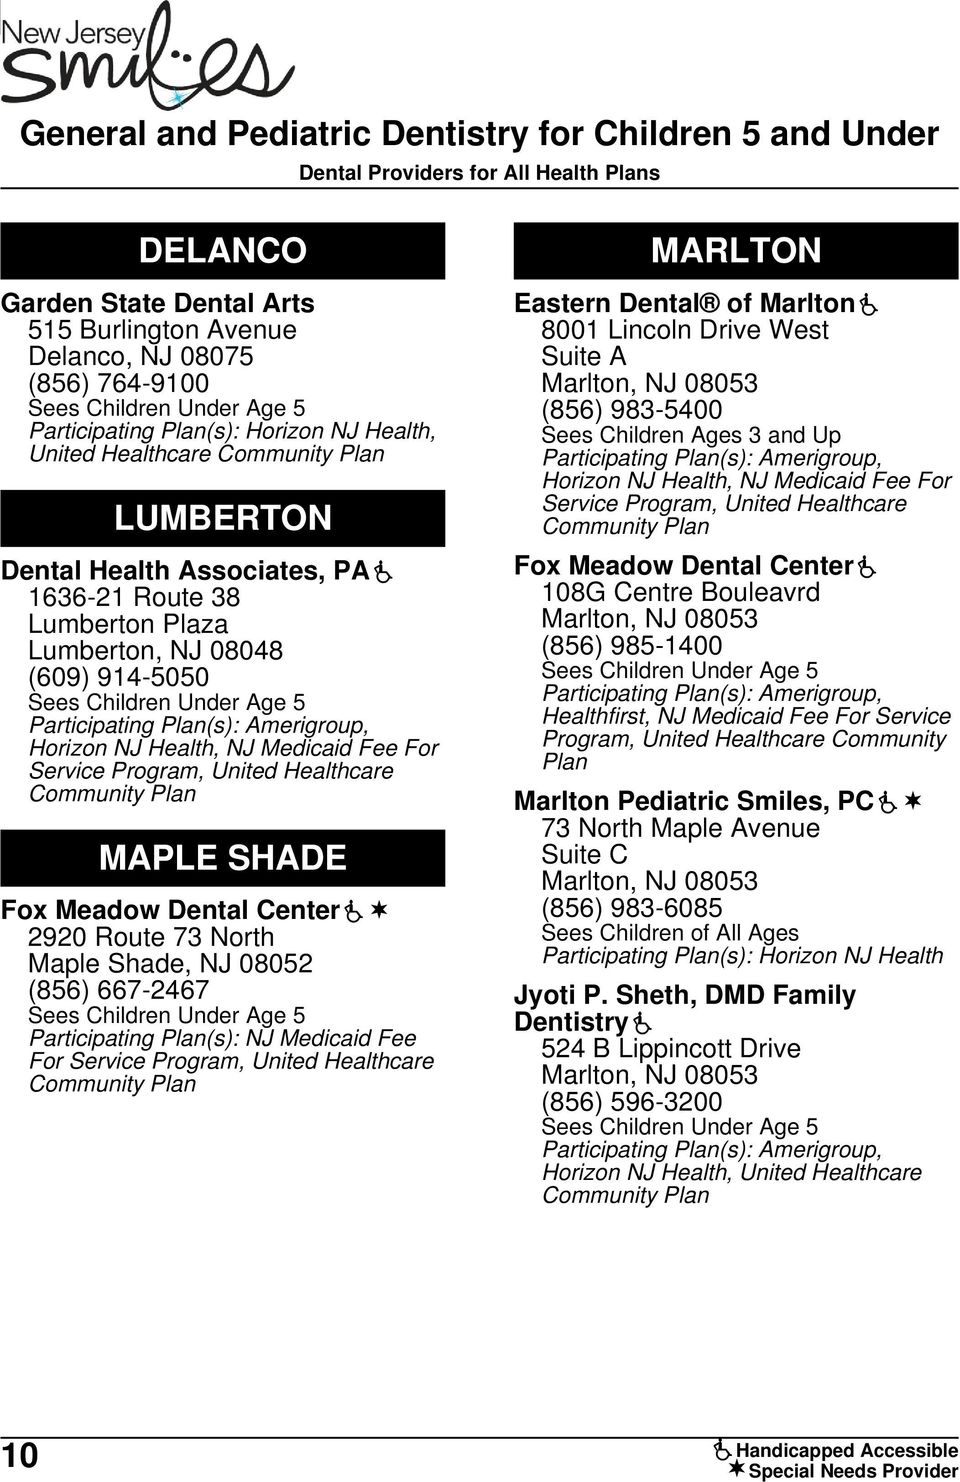 Directory Of Dental Providers For Children - Pdf Free Download